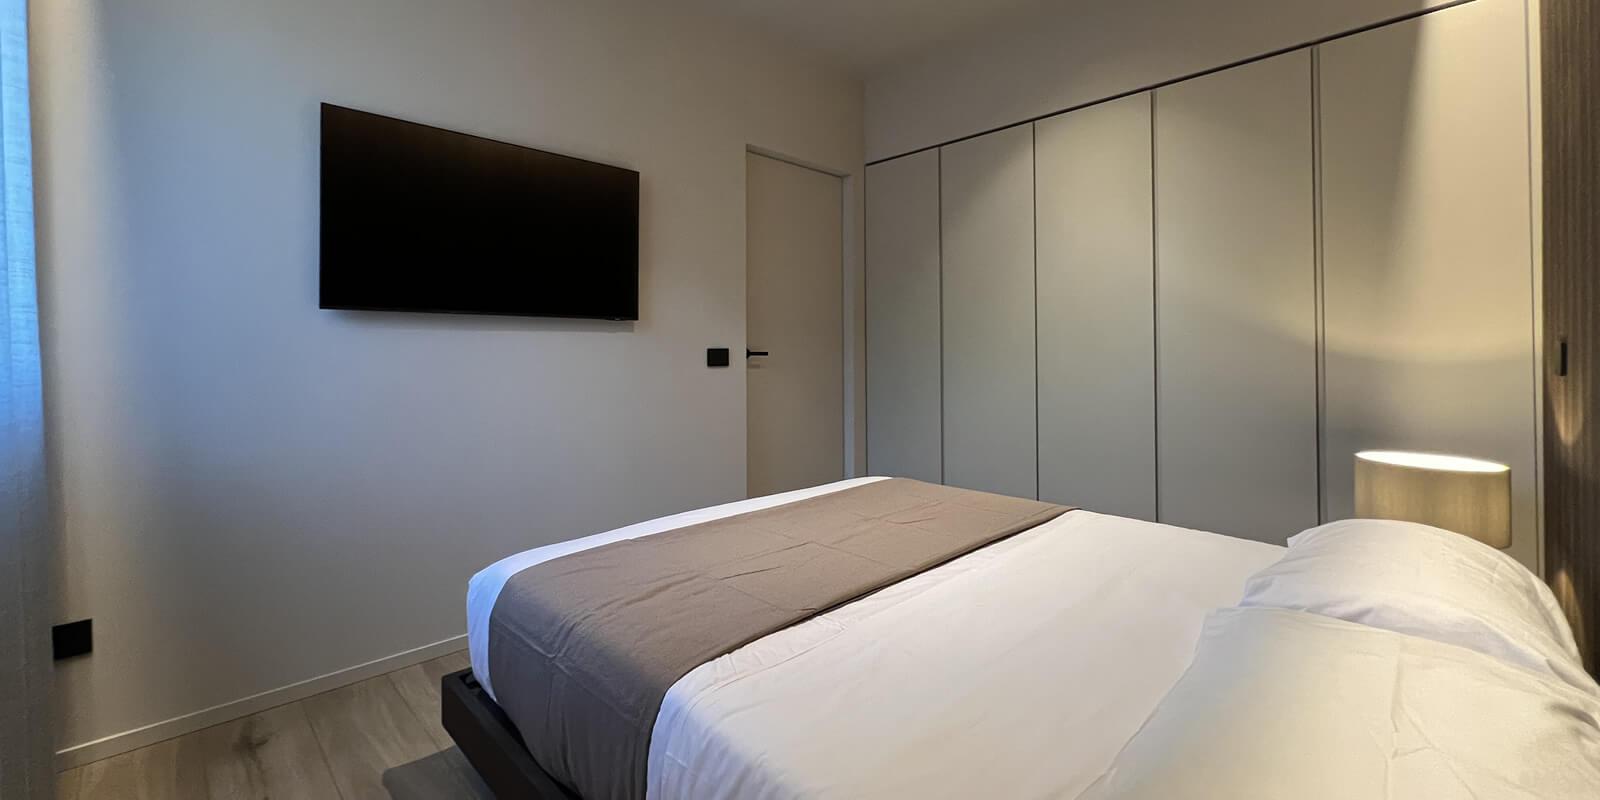 Modern bedroom with a double bed, wall-mounted TV, and built-in wardrobe.